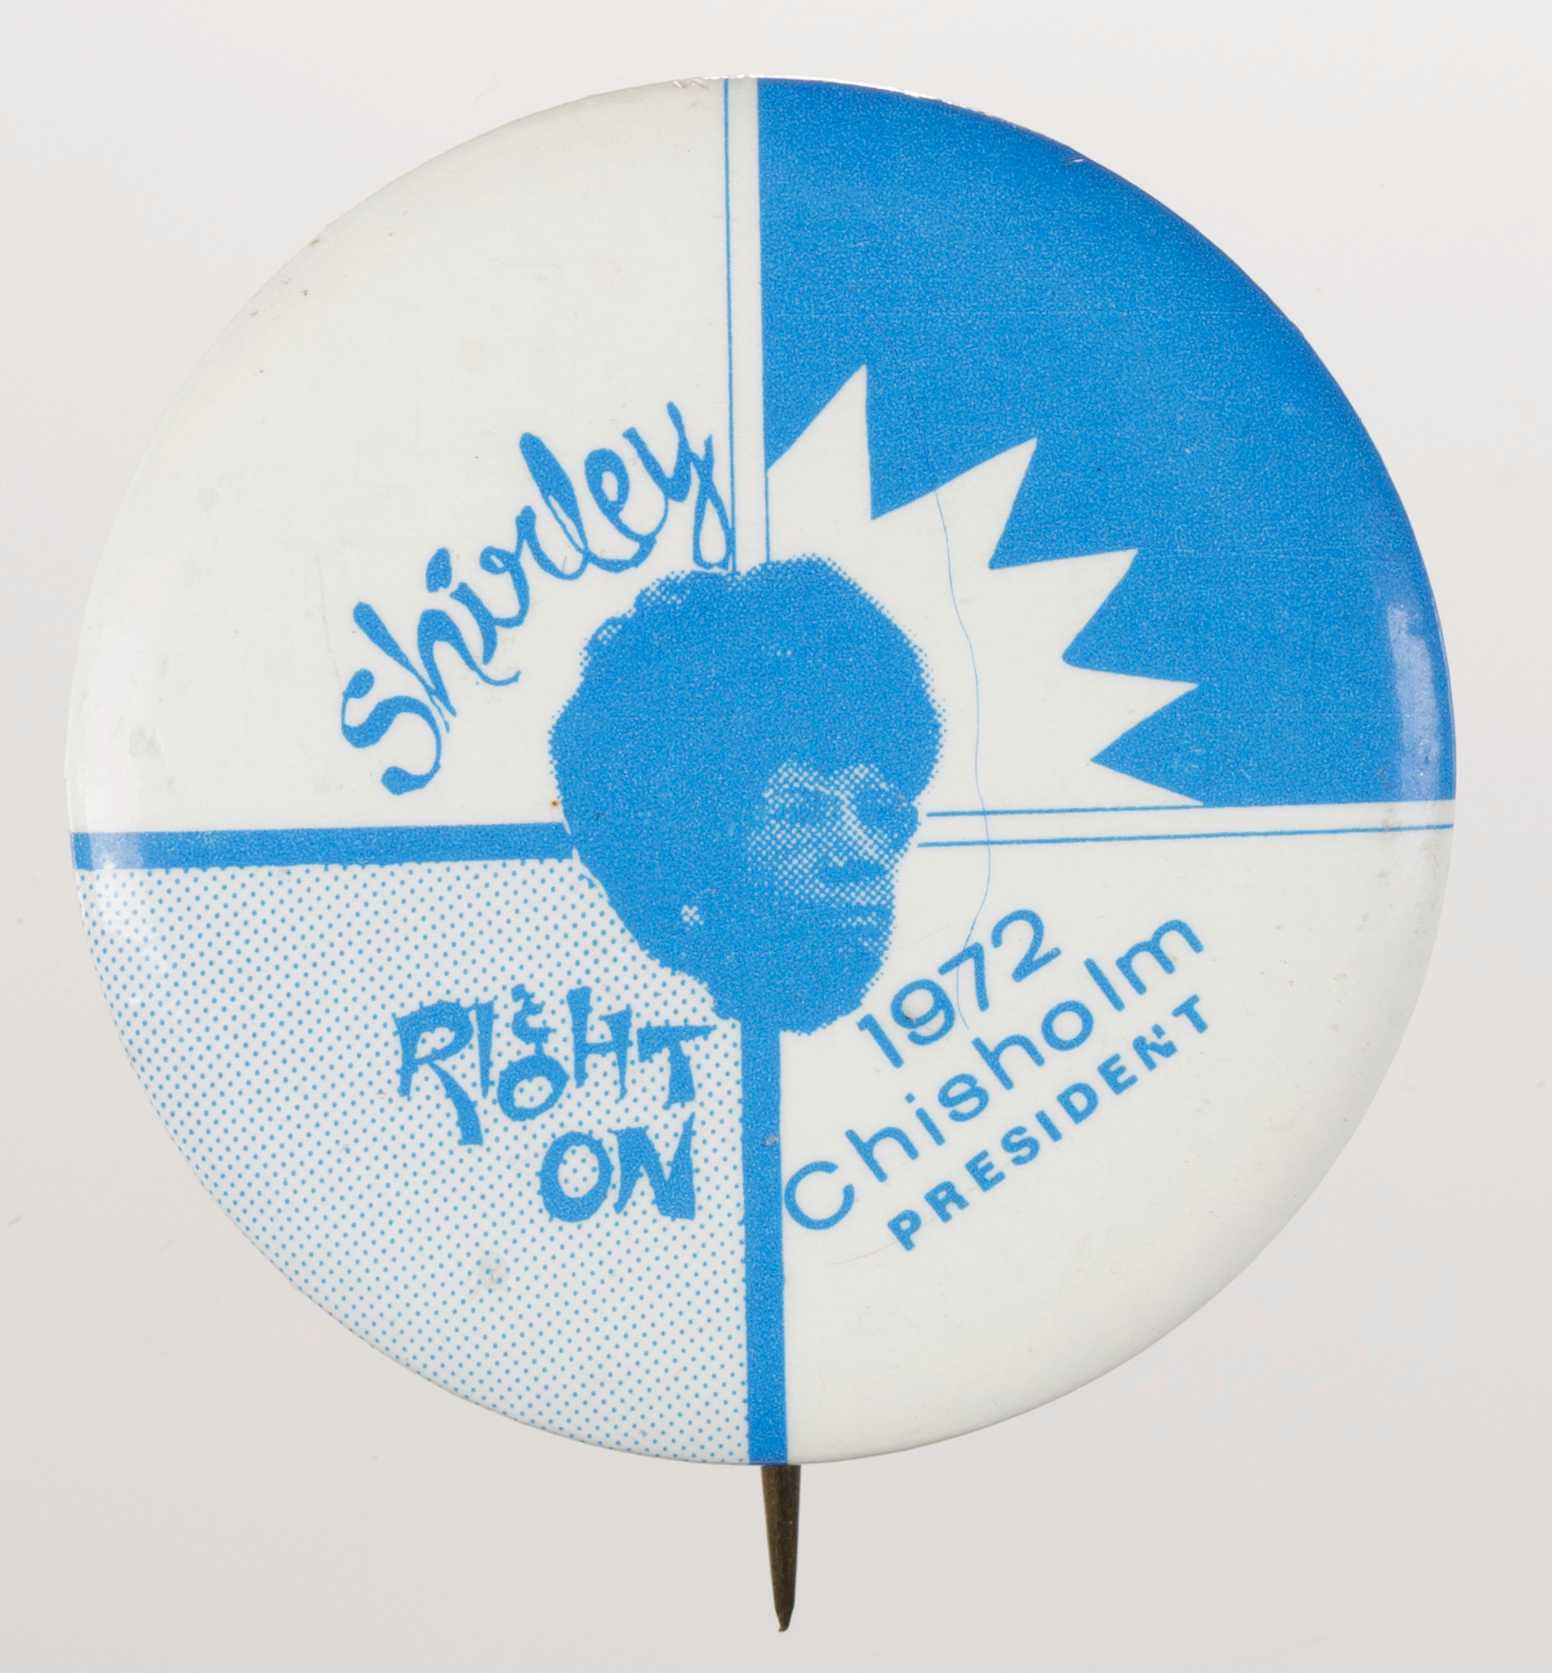 A circular metal pin-back button. The button has a white and blue background that is sectioned off into quarters through crisscross lines. A blue depiction of Shirley Chisholm is in the center of the button. Blue text surrounds the depiction of Chisholm and reads: [Shirley] in the upper left quadrant, [Right / ON] in the bottom left quadrant, and [1972 / Chisholm / PRESIDENT] in the bottom right quadrant. The back of the button is silver in color and has a single pin without a clasp.